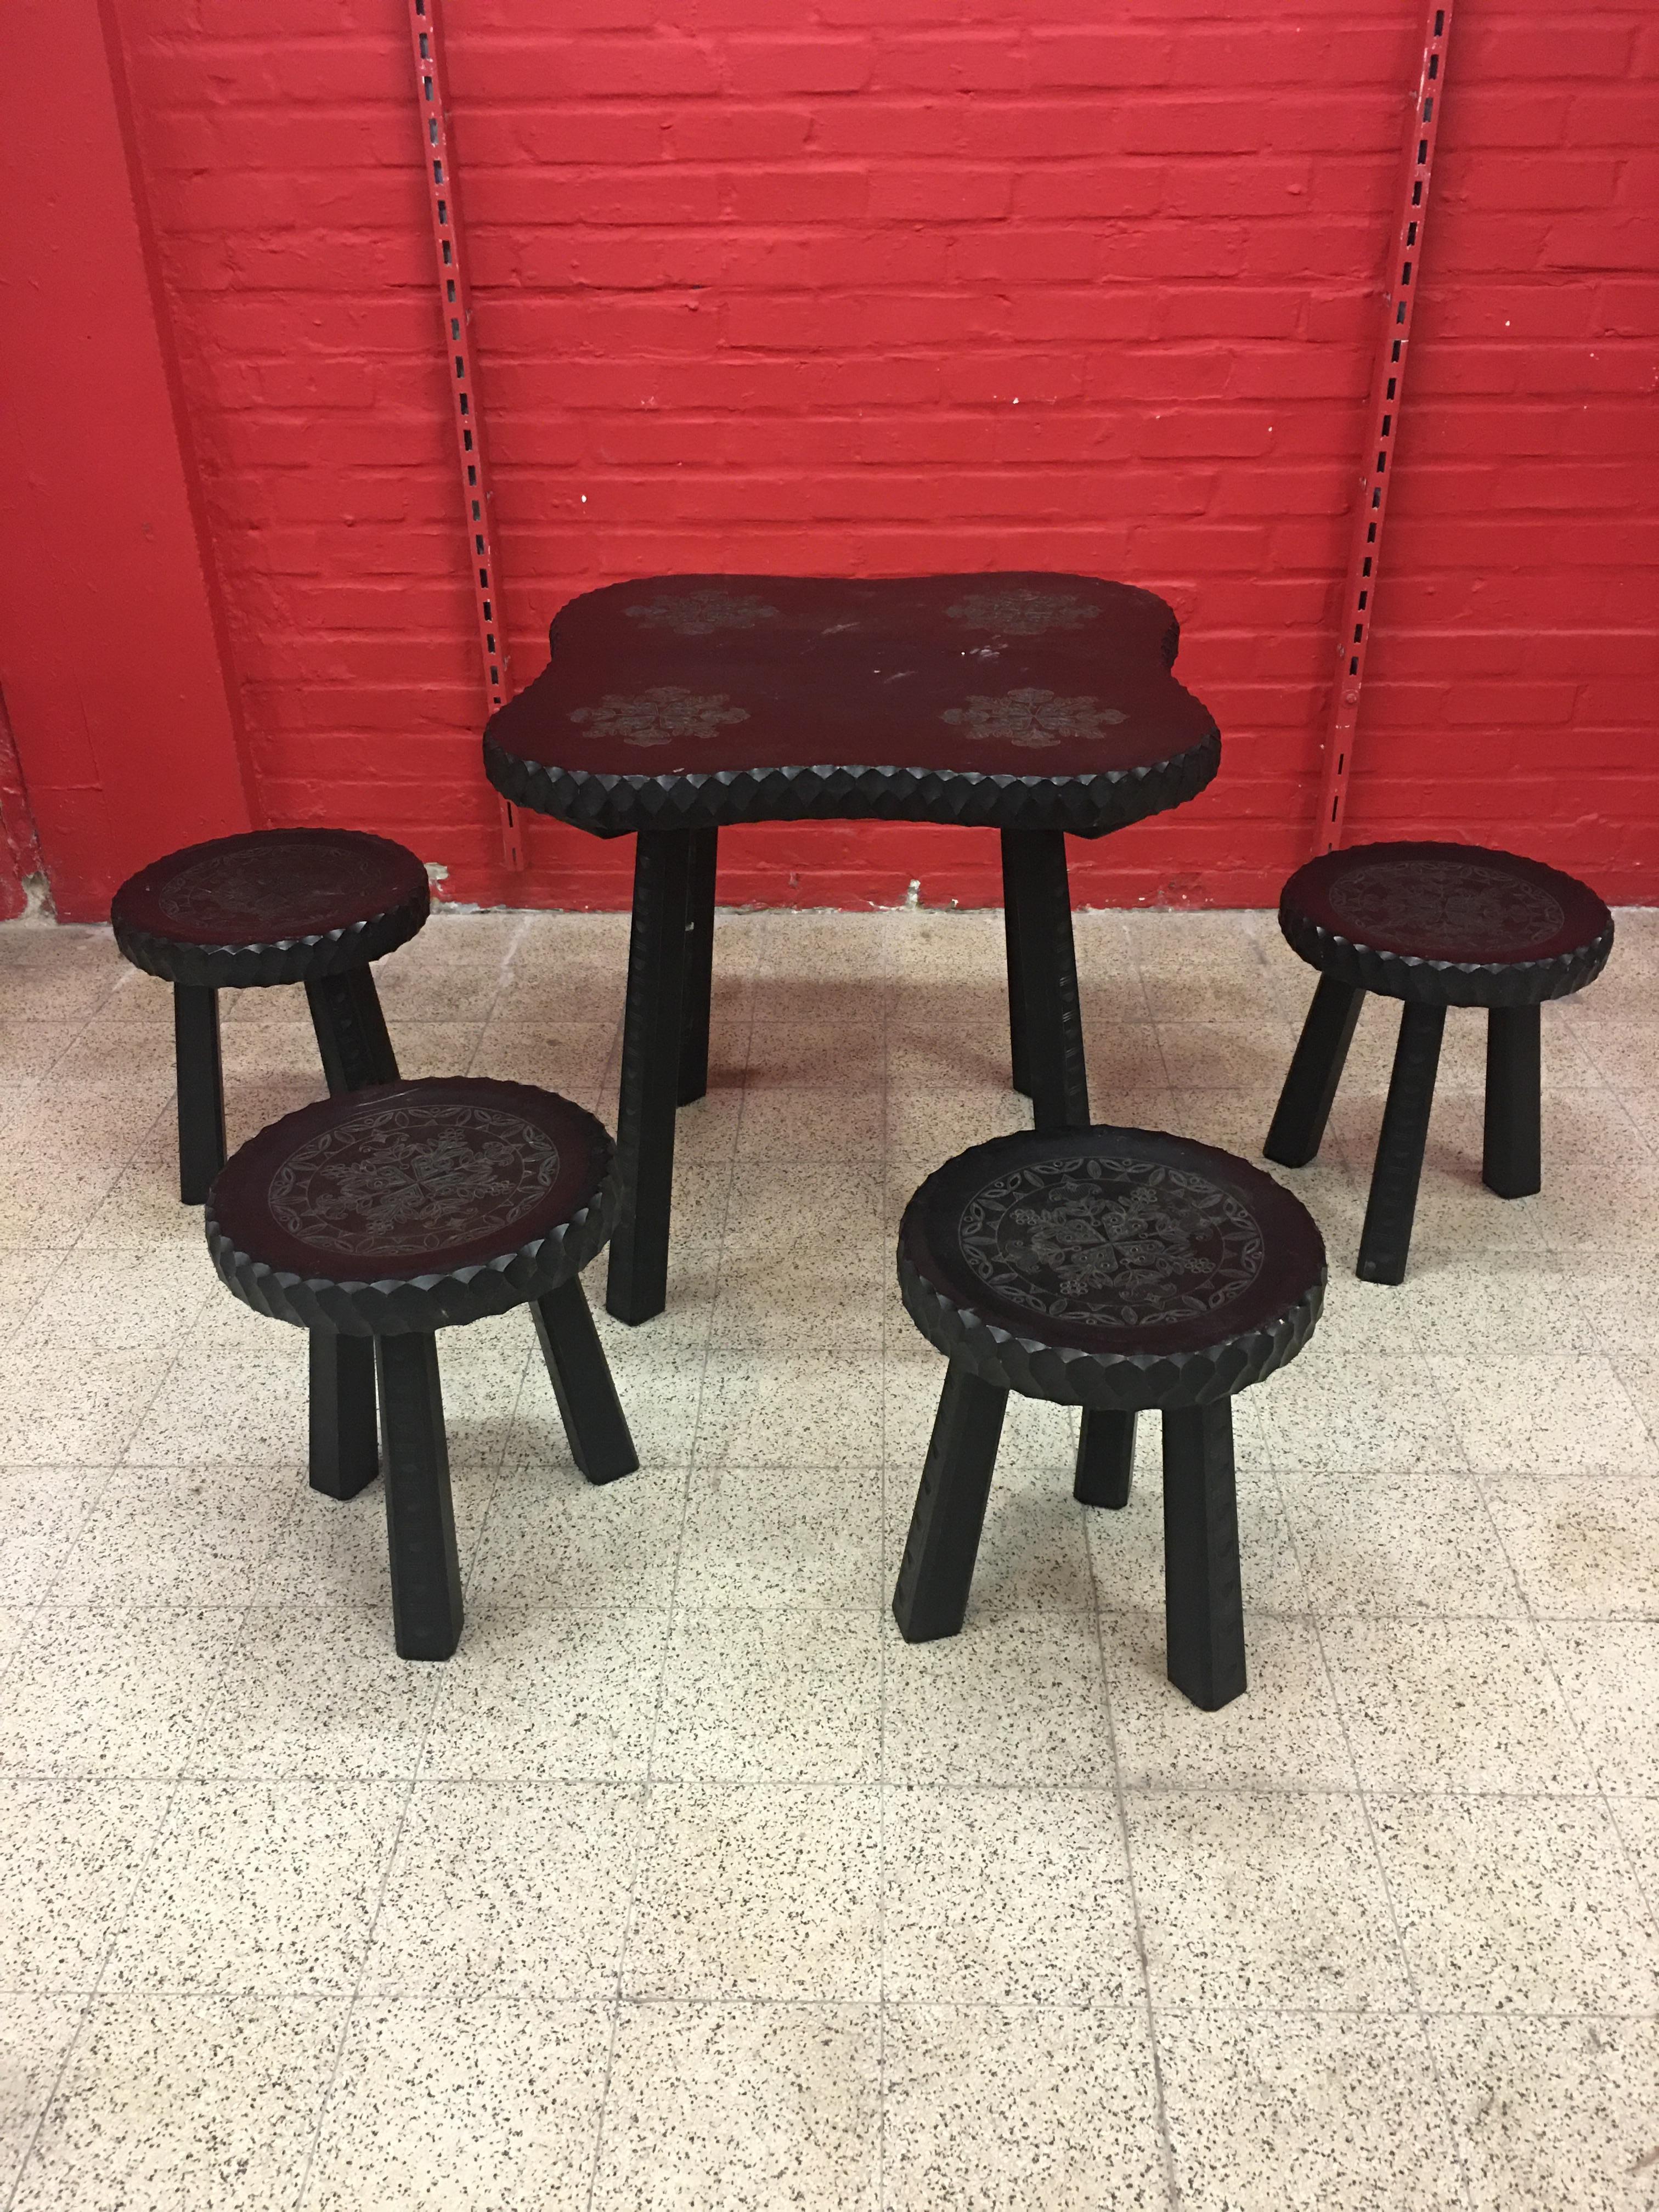 Four Organic Stools in Blackened Wood, circa 1950-1960 For Sale 4